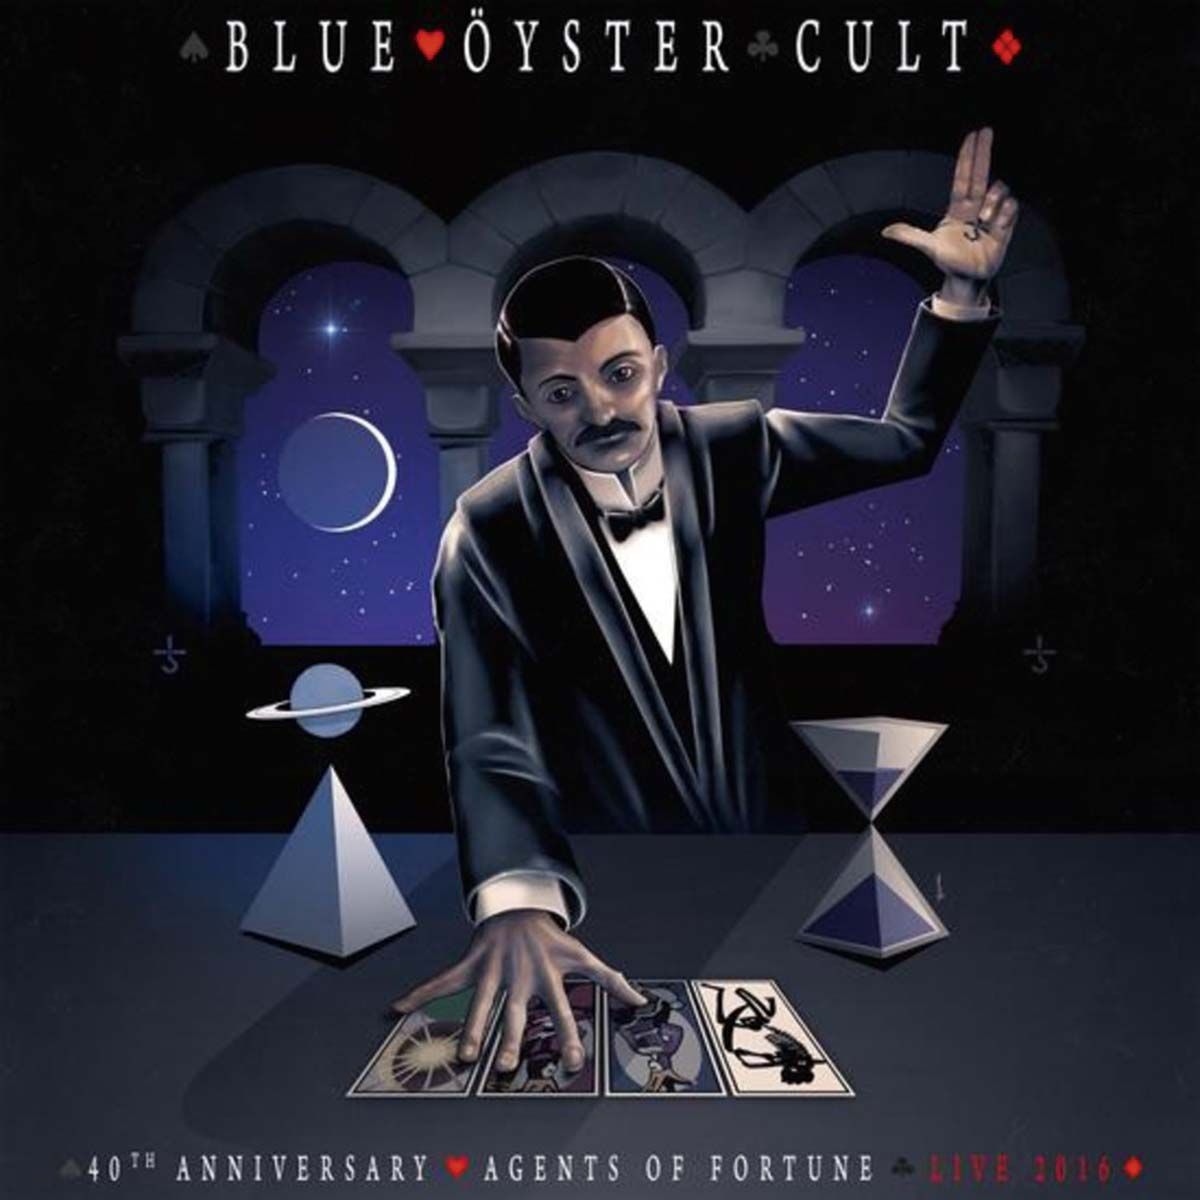 Blue Öyster Cult - 40th Anniversary: Agents Of Fortune - Live 2016